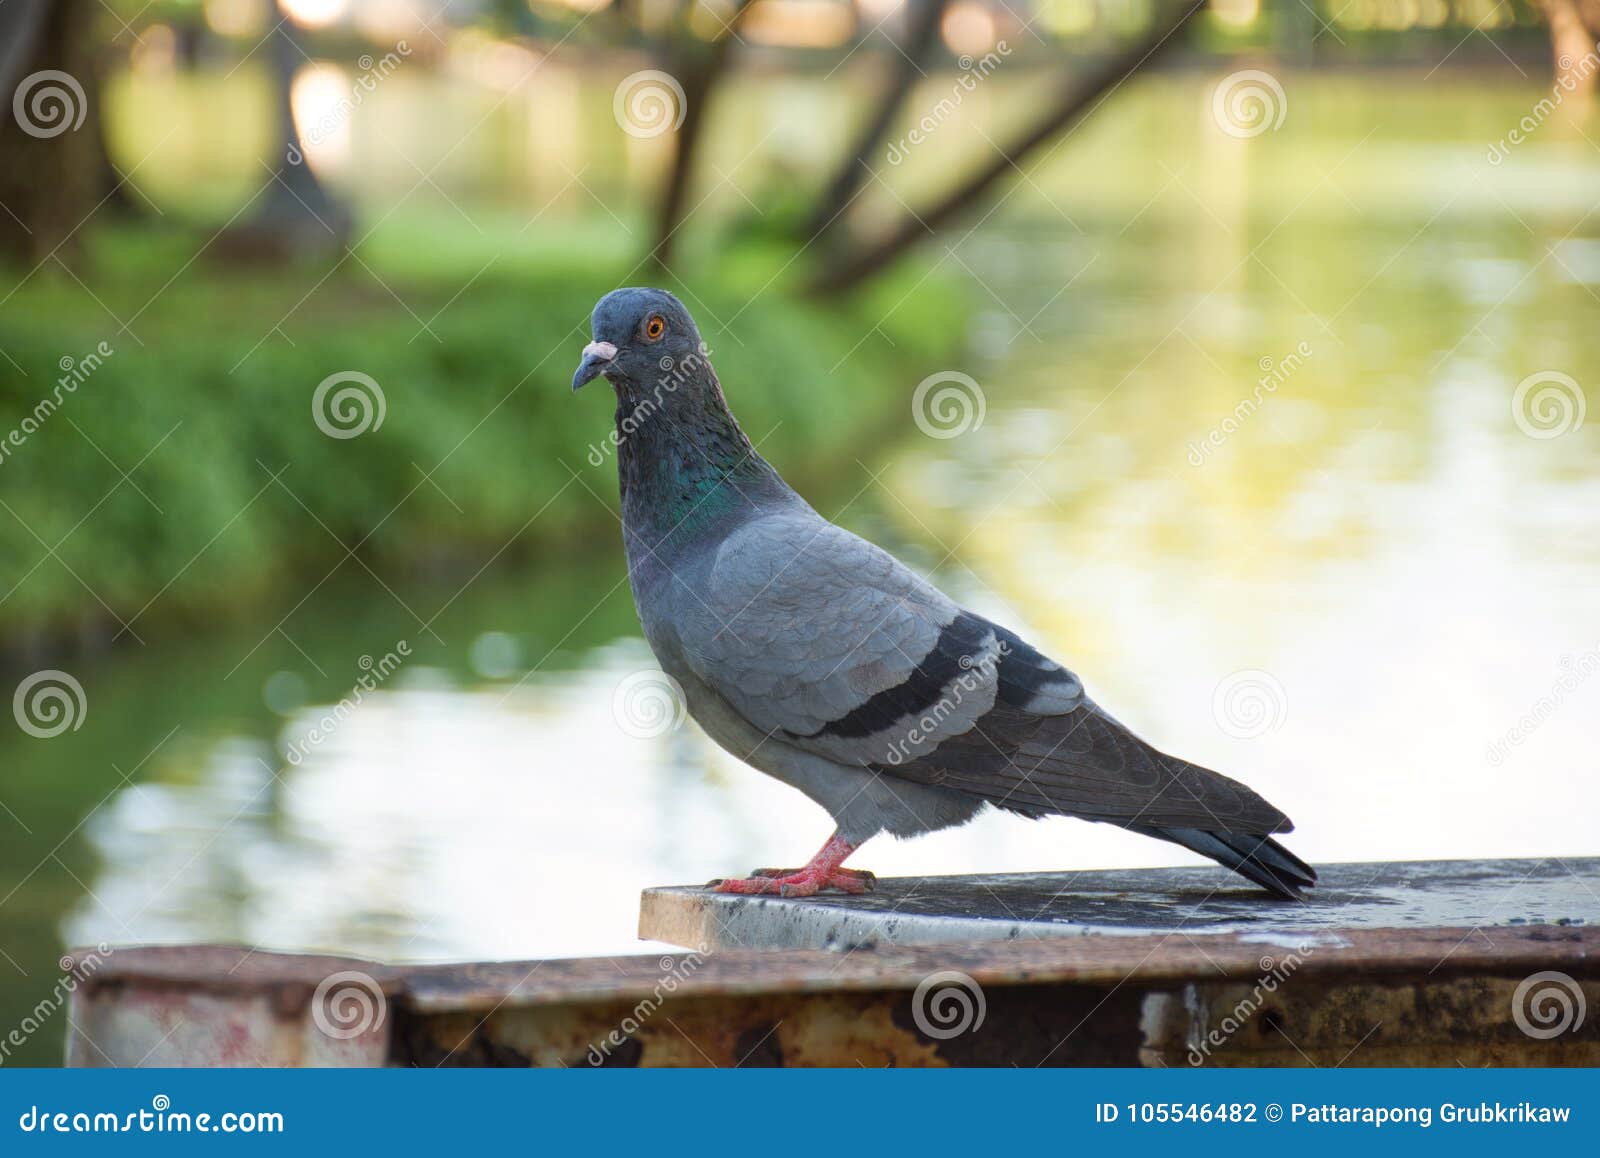 Rock dove waiting for soul mate. A portrait of a rock dove with a dignified look at the lakee, probably waiting for soul mate to spend whole life together.